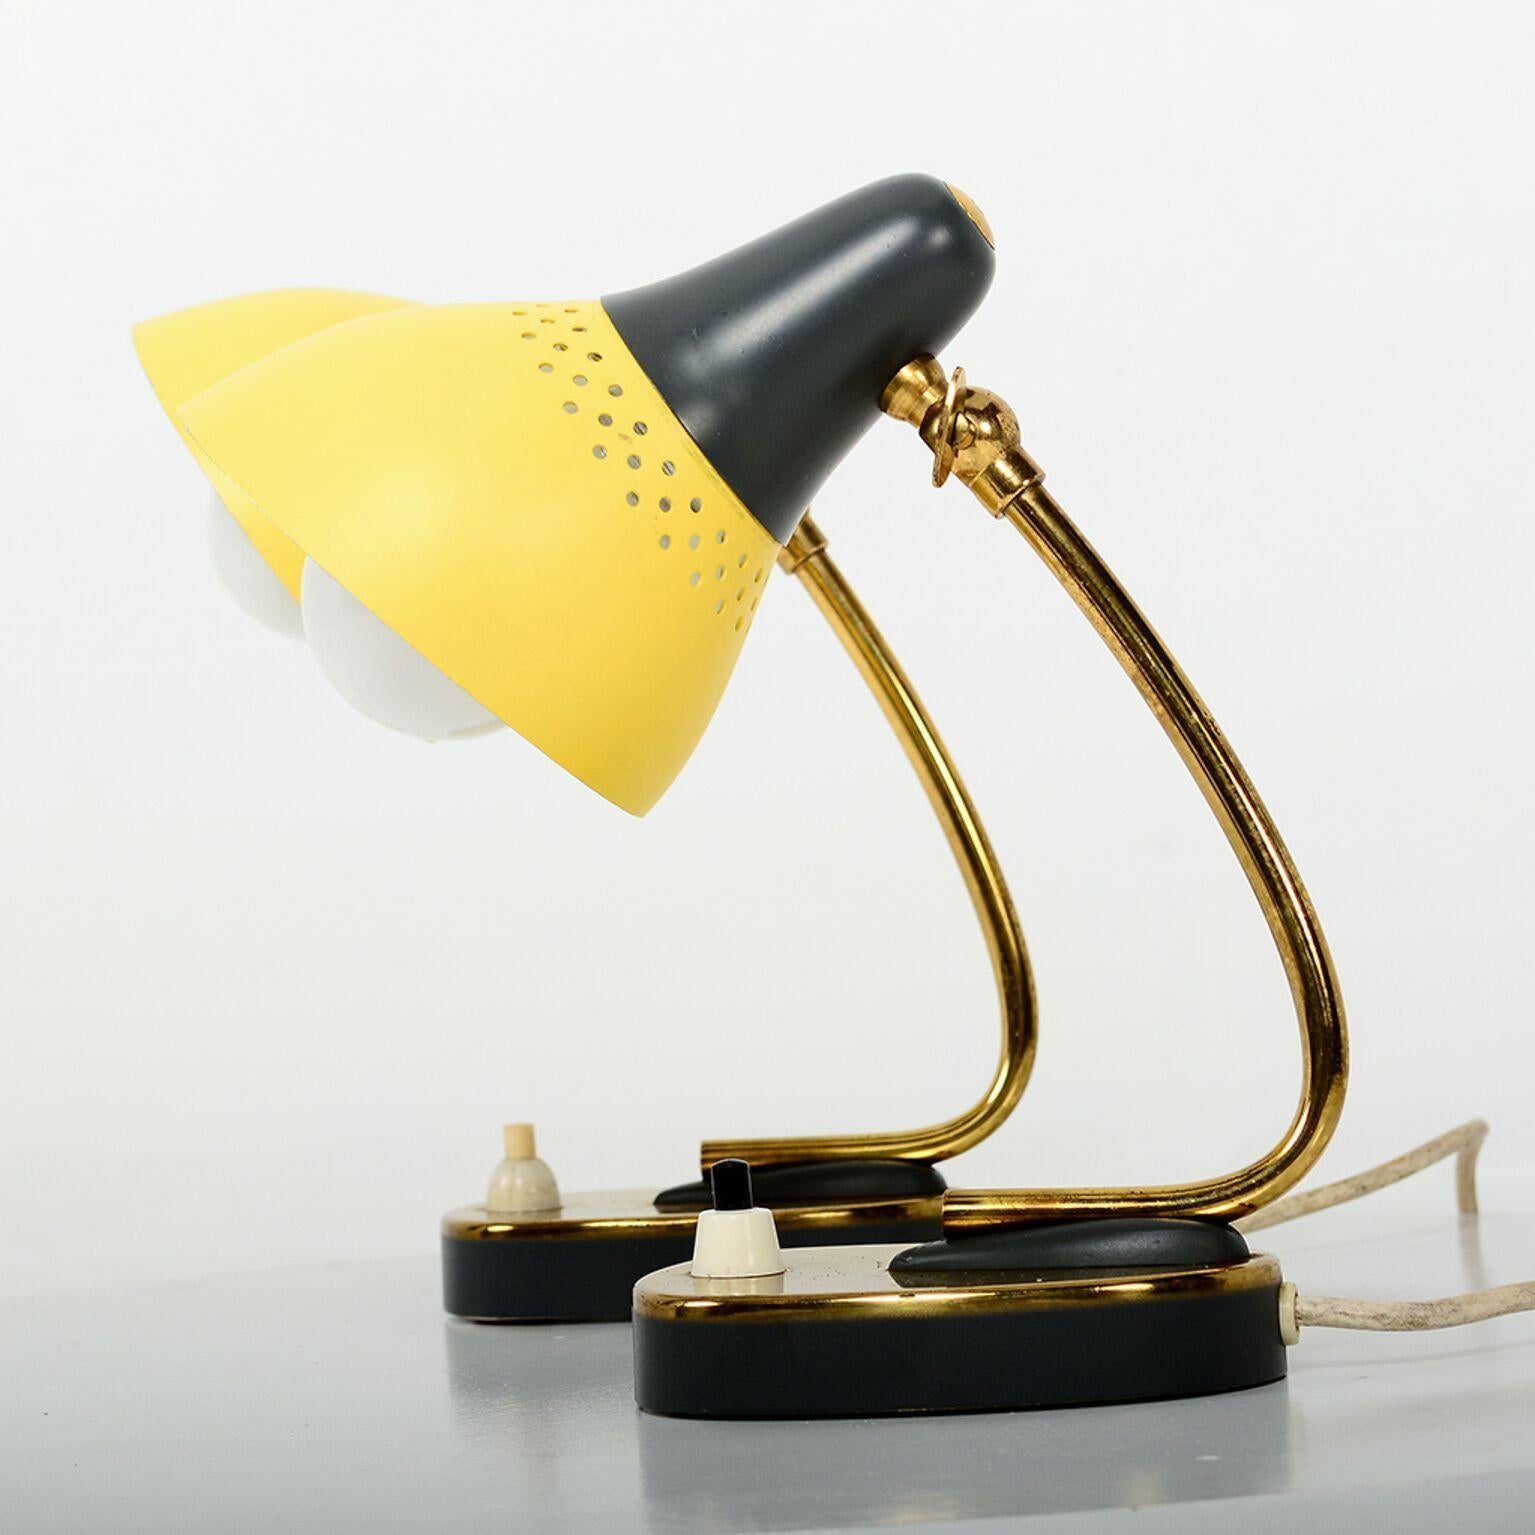 For your consideration, a pair of petite table lamps. Made in Italy. Attributed to Stilnovo. No label present, circa 1960s. Unique sassy sculptural shape with brass body. Shade is made of aluminum painted in yellow and dark gray. Shade is adjustable